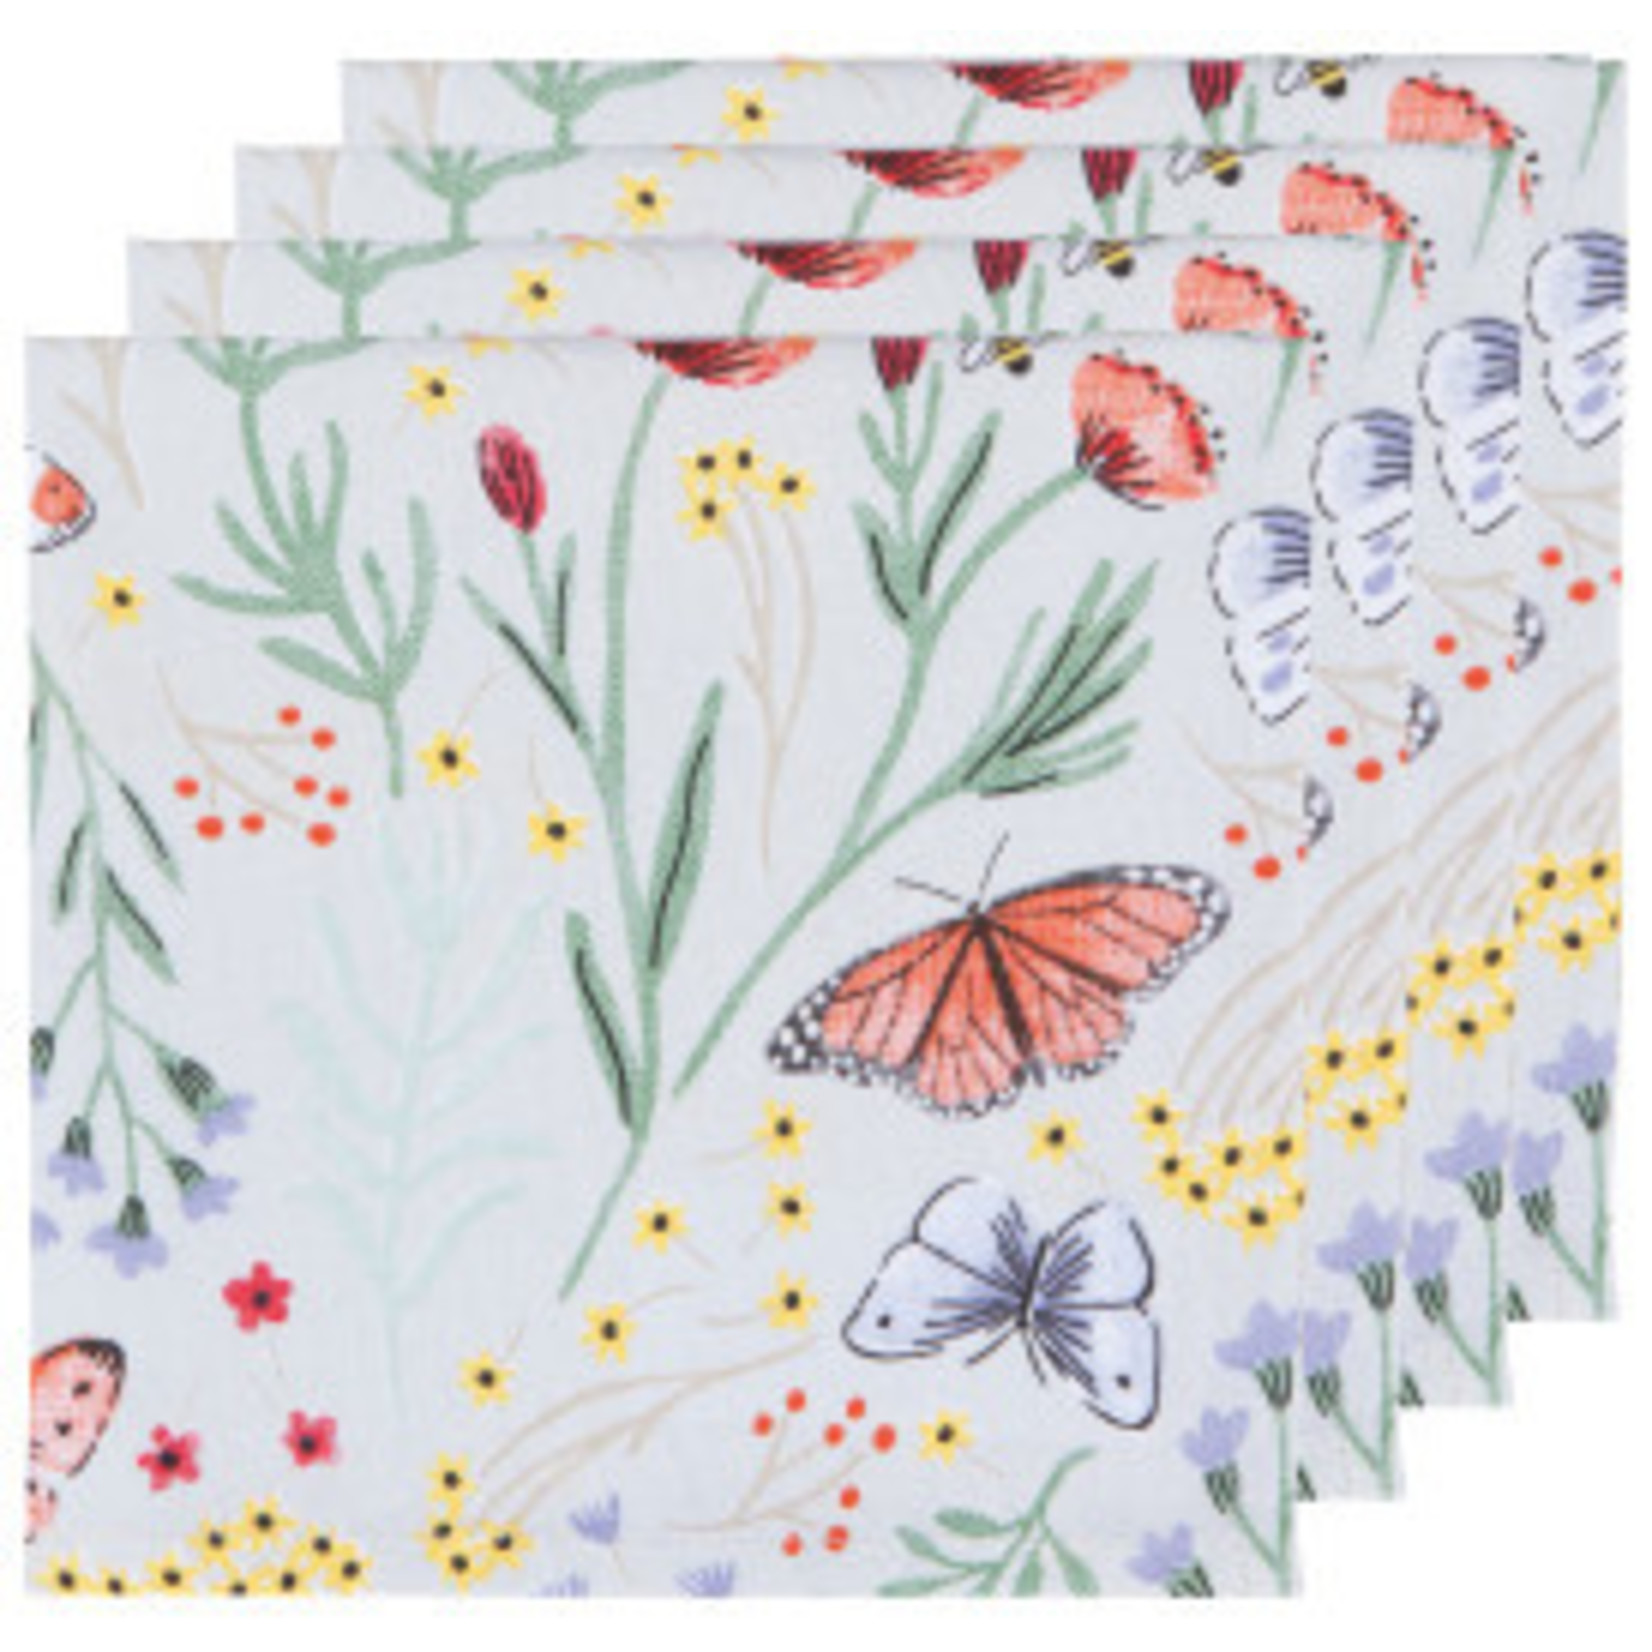 Morning Meadow - Napkins S/4